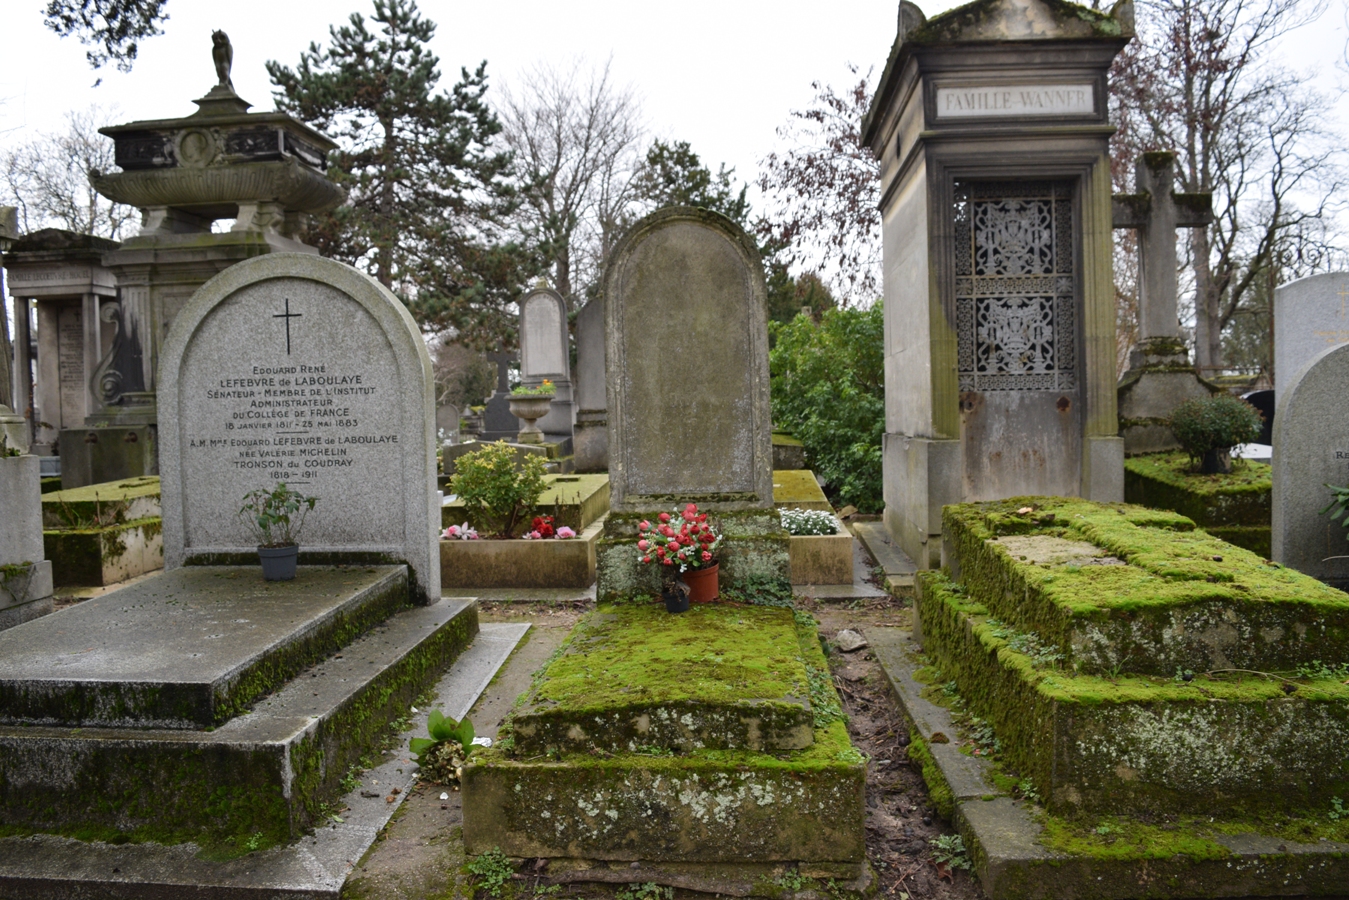 Photo Diary: Père Lachaise Cemetery | The Cheerful Wanderer